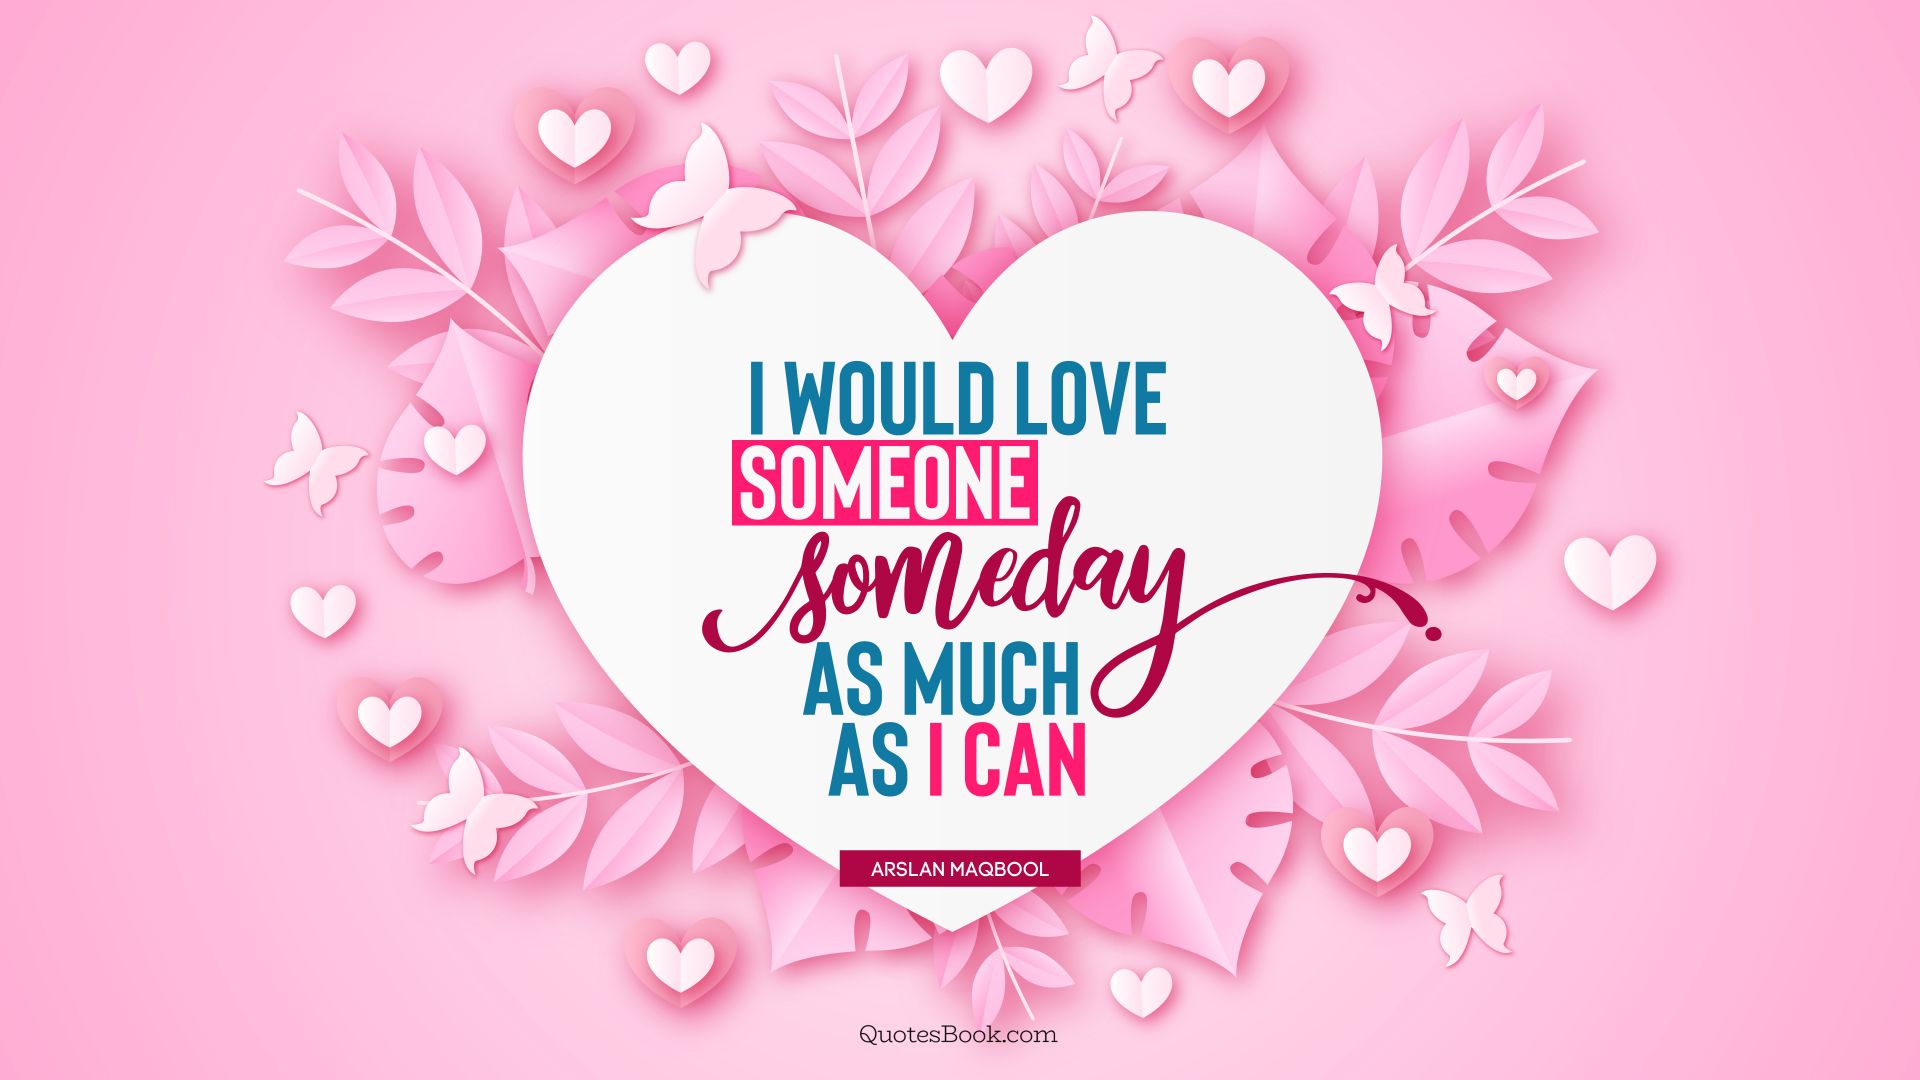 I would love someone someday as much as I can. - Quote by Arslan Maqbool